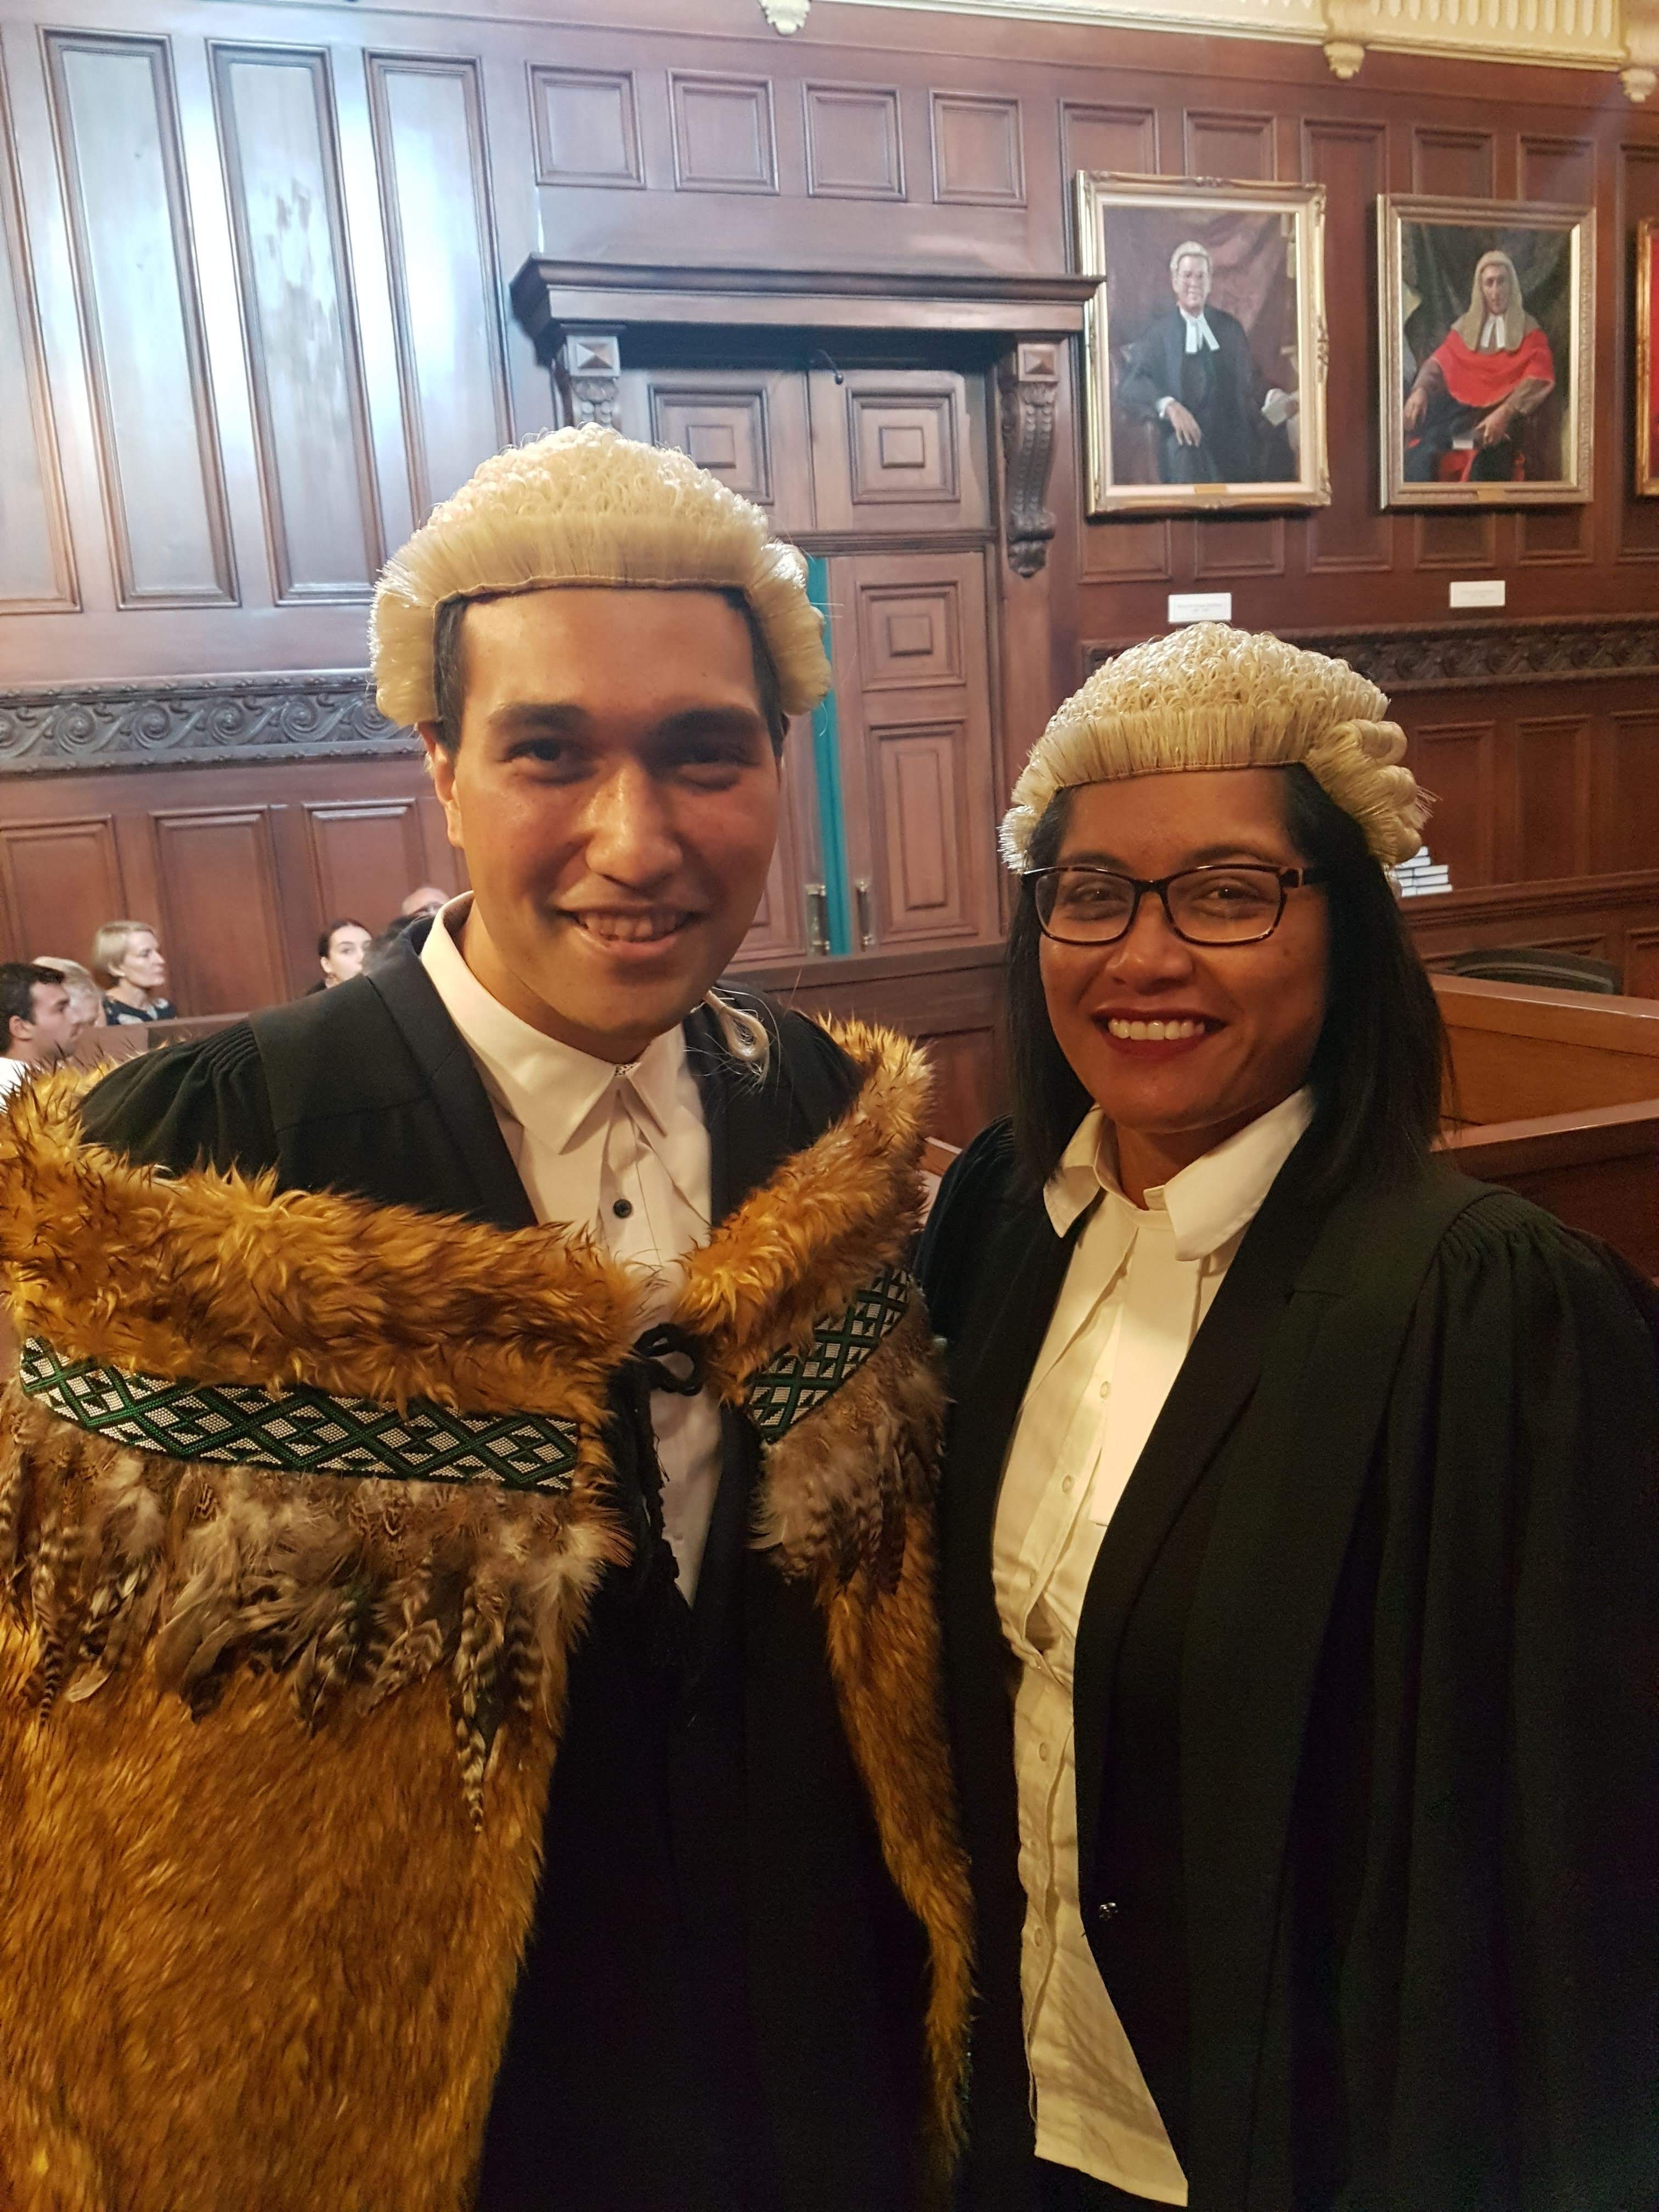 Duncan stands in a wood paneled courtroom next to a lady who is smiling. Both are wearing barrister wigs. Duncan is wearing a korowai (cloak)